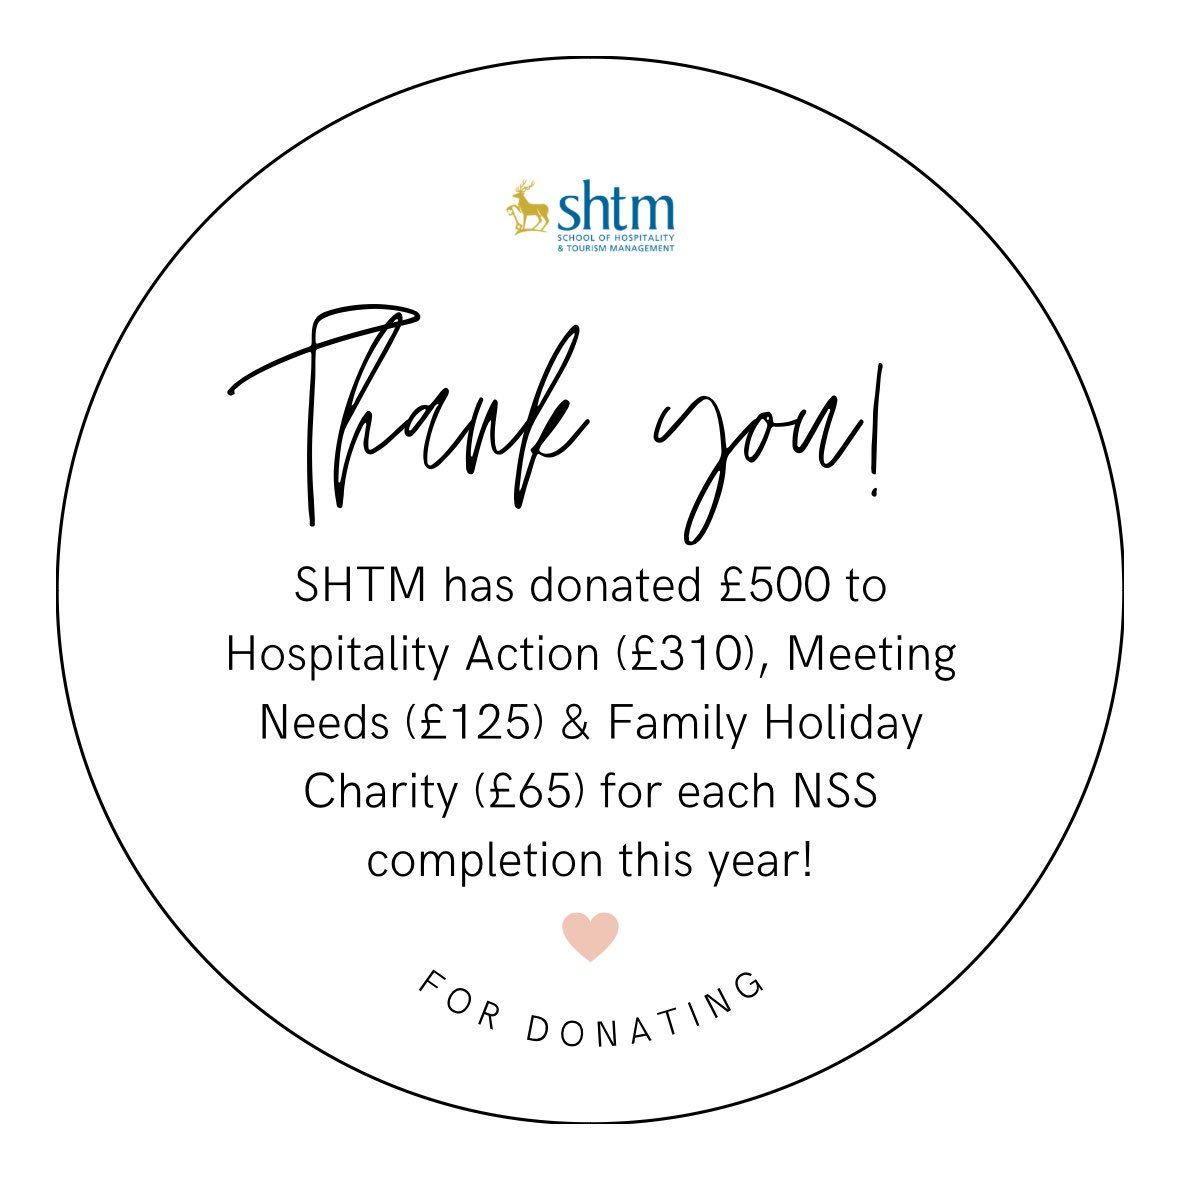 This year, #SHTMatSurrey donated to @HospAction @UKMeetingNeeds @famholcharity for every NSS completion! Thank you to all our students for completing the NSS🙏 

#TOURISMatSurrey #EVENTSatSurrey #HOSPITALITYatSurrey #TRANSPORTatSurrey #WonderfulSHTM